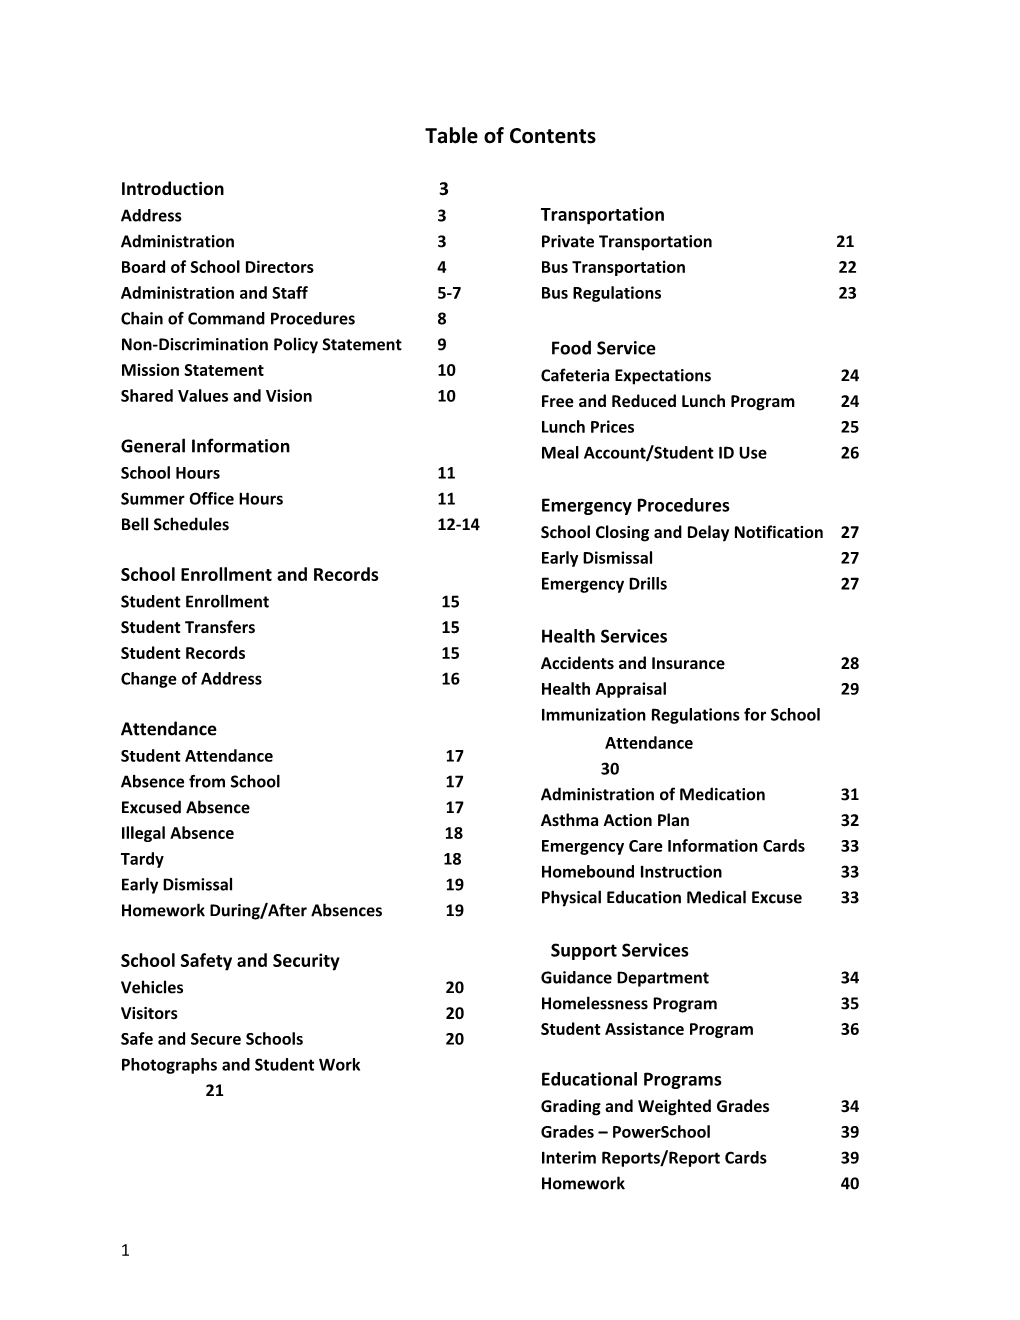 Table of Contents s331